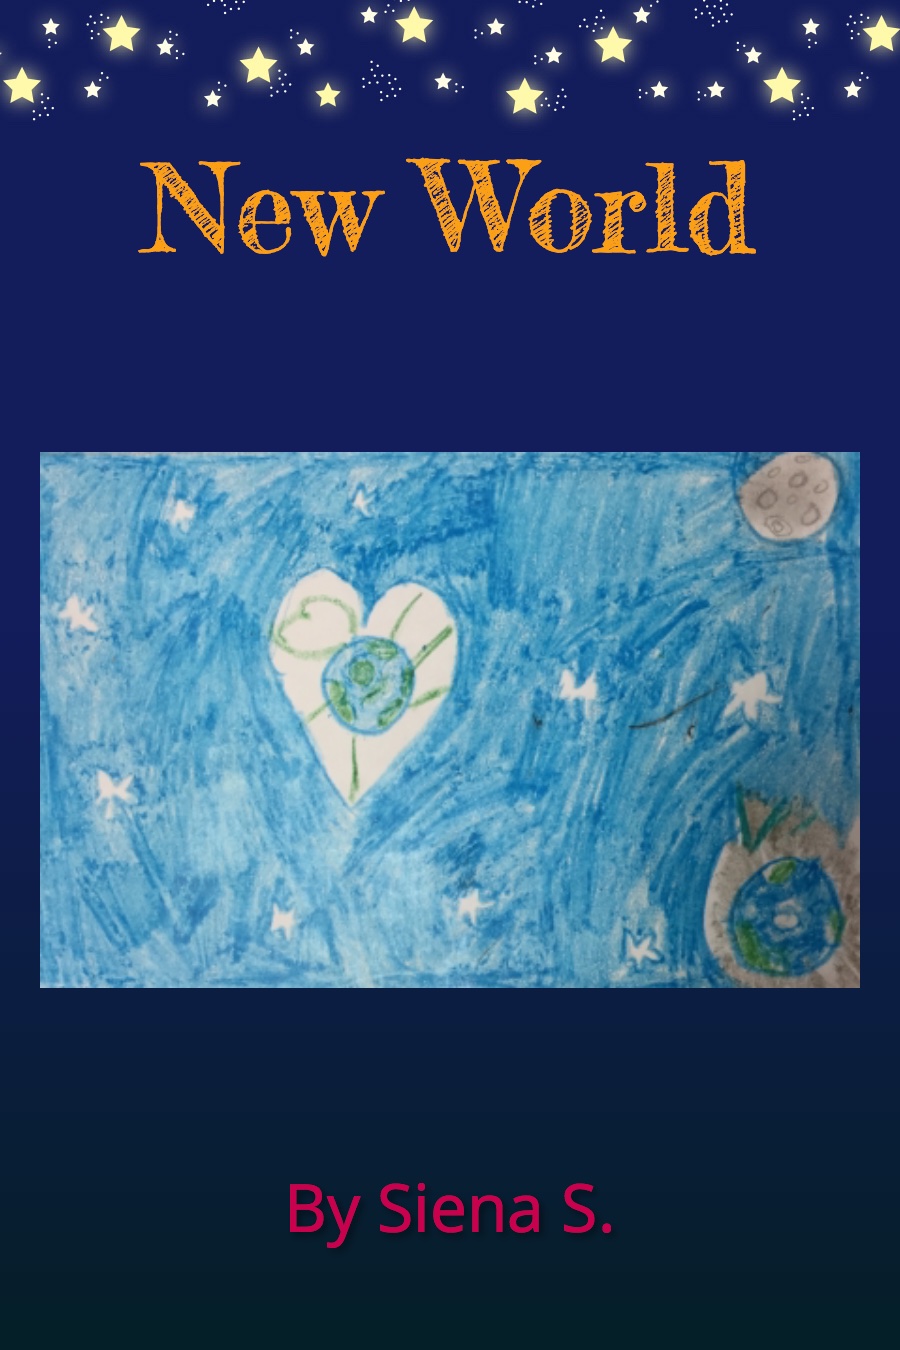 New World by Siena S FINAL VERSION